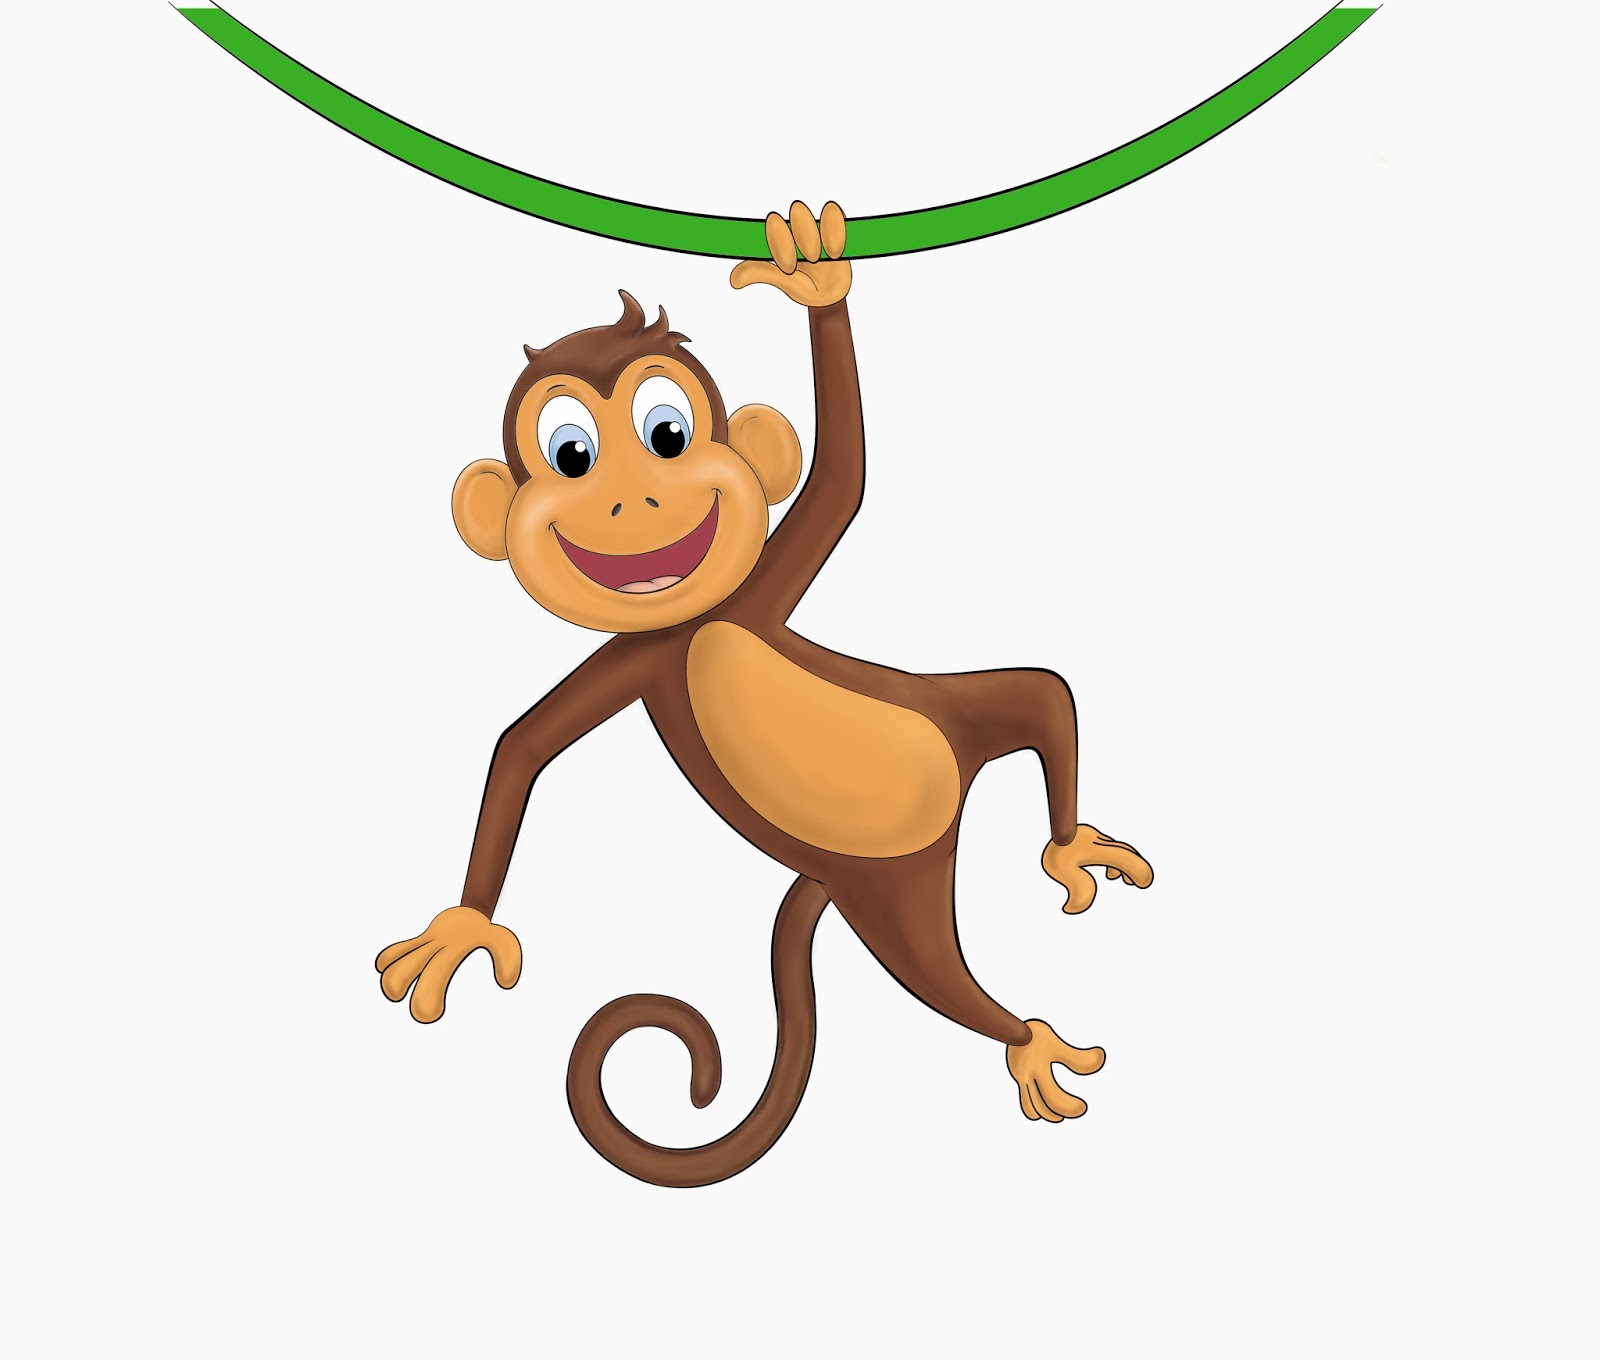 Hanging Monkey Template   Clipart Panda   Free Clipart Images